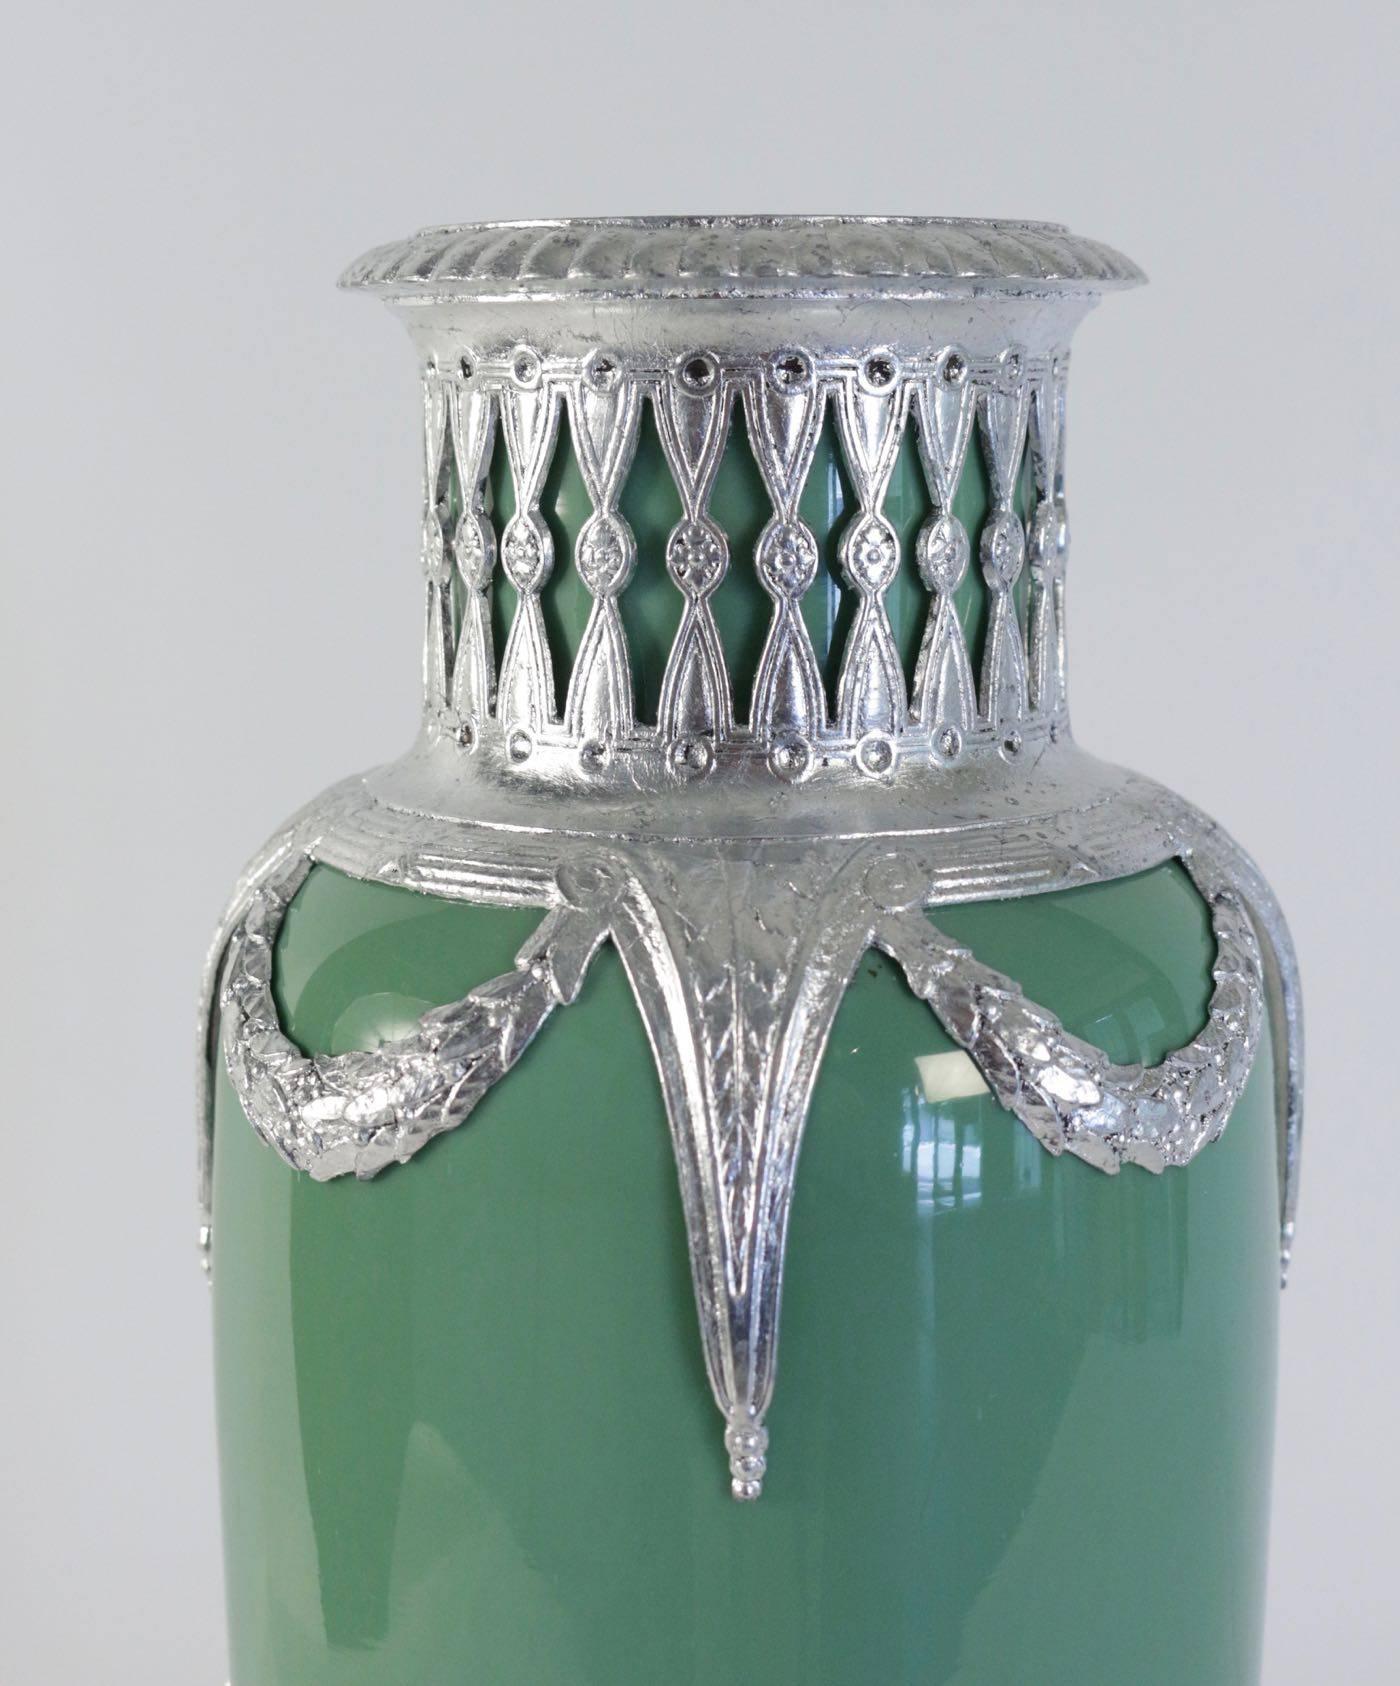 Celadon Vase in Faience, Silver Plate and Silver Leaf, 19th Century Period For Sale 1